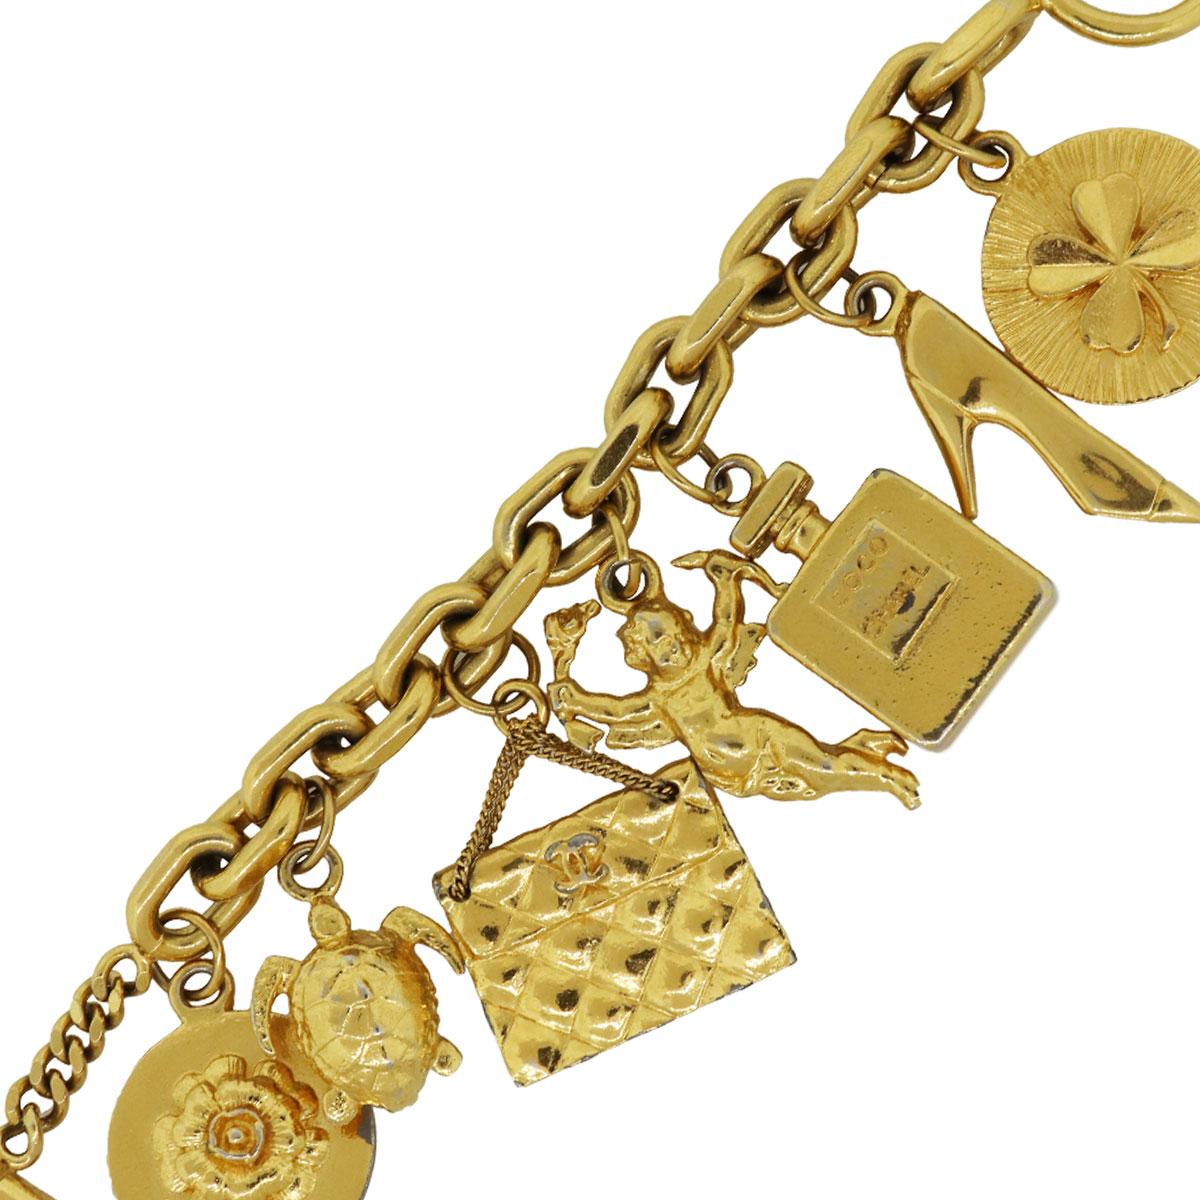 Designer: Chanel
Material: Metal with gold tone hardware
Measurements: Will fit an 8 wrist
Clasp: Toggle
Item Weight: 199.2g (128.1dwt)
Additional Details: Has slight damage gold tone on this bracelet. This item comes with a Diamonds by Raymond Lee